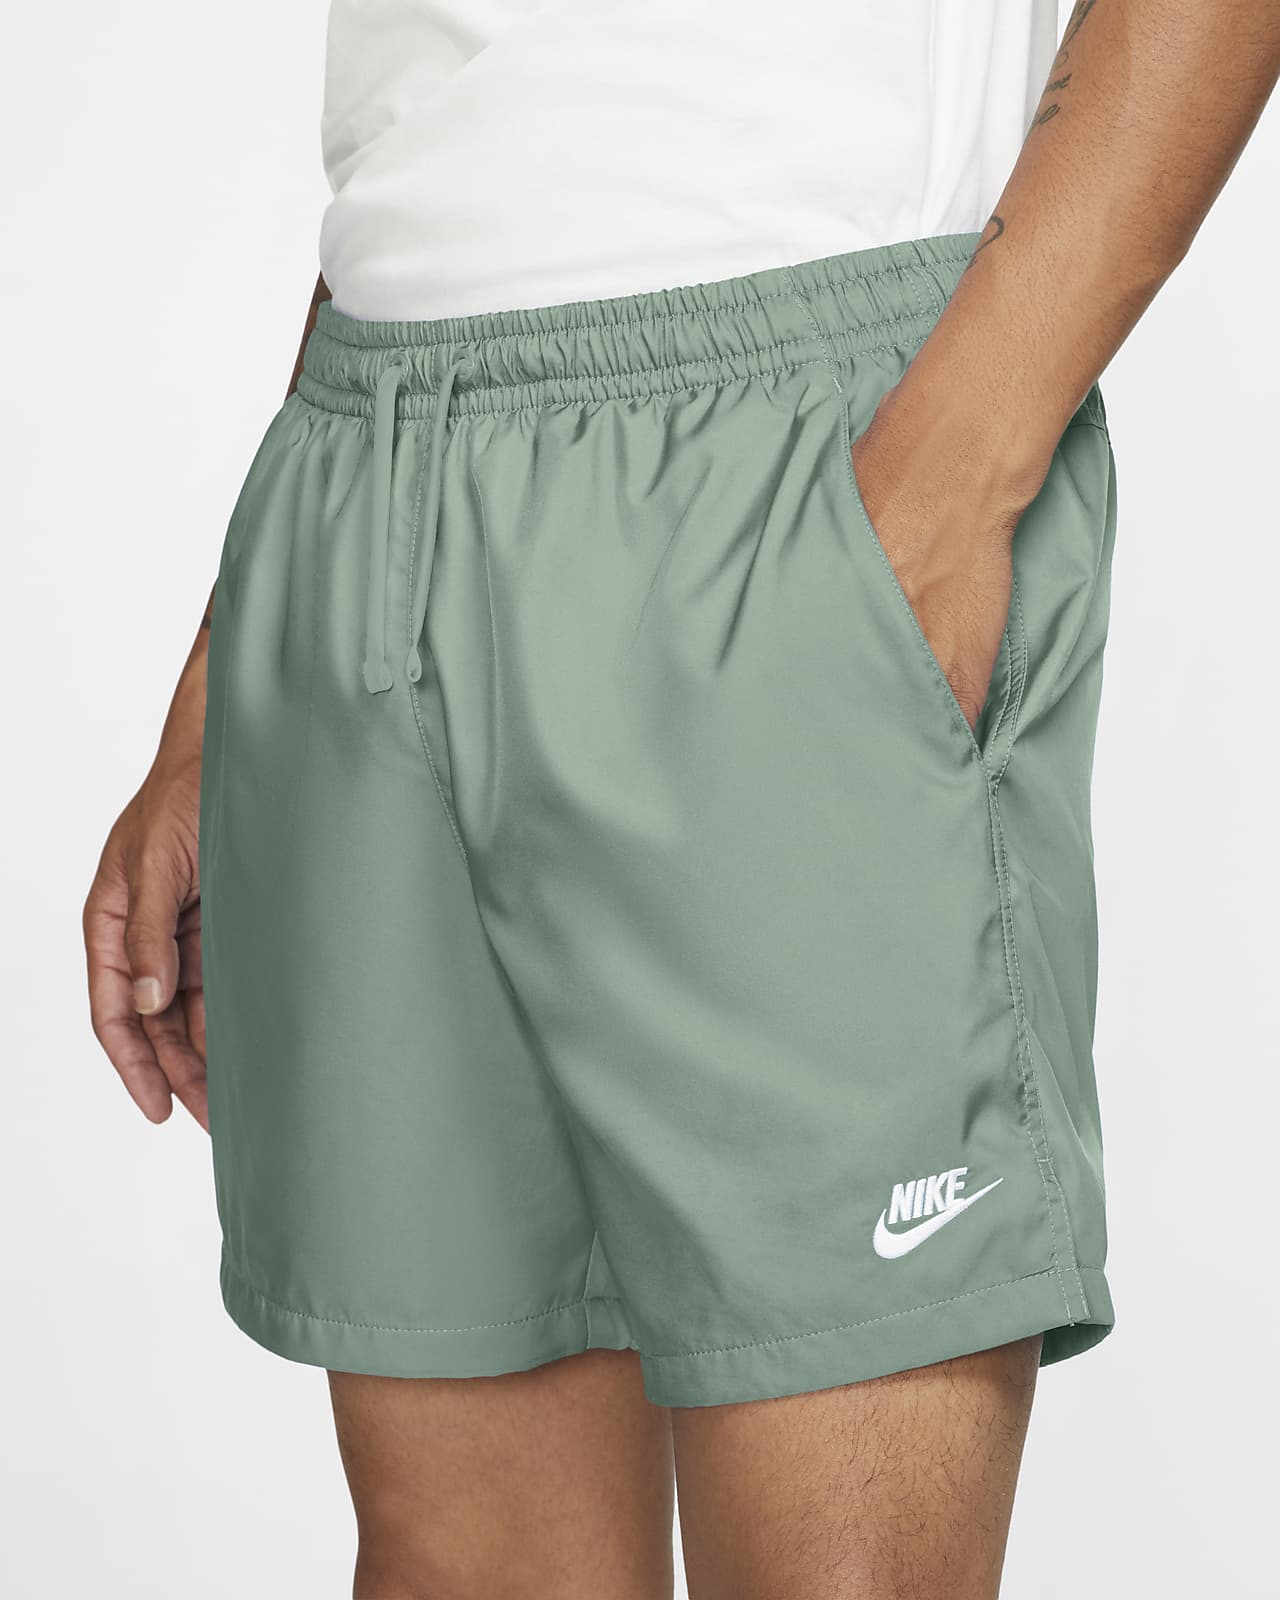 Buy > nike standard fit above knee shorts > in stock